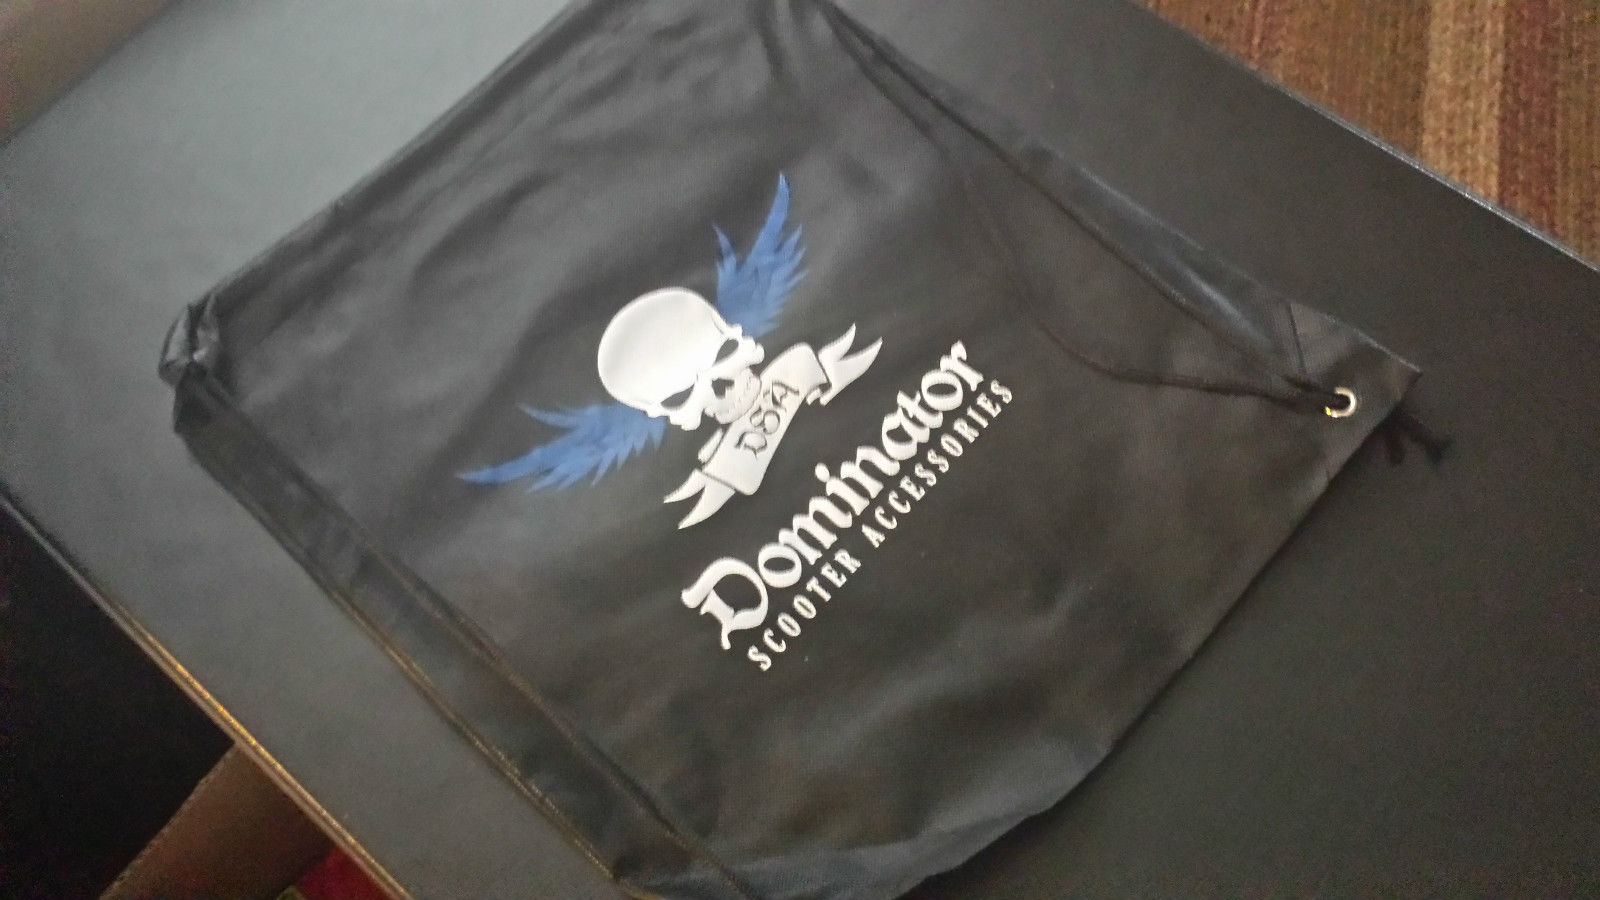 Dominator Scooter Cinch Bag-Black with blue white logo & skull-with drawstrings  - $5.00